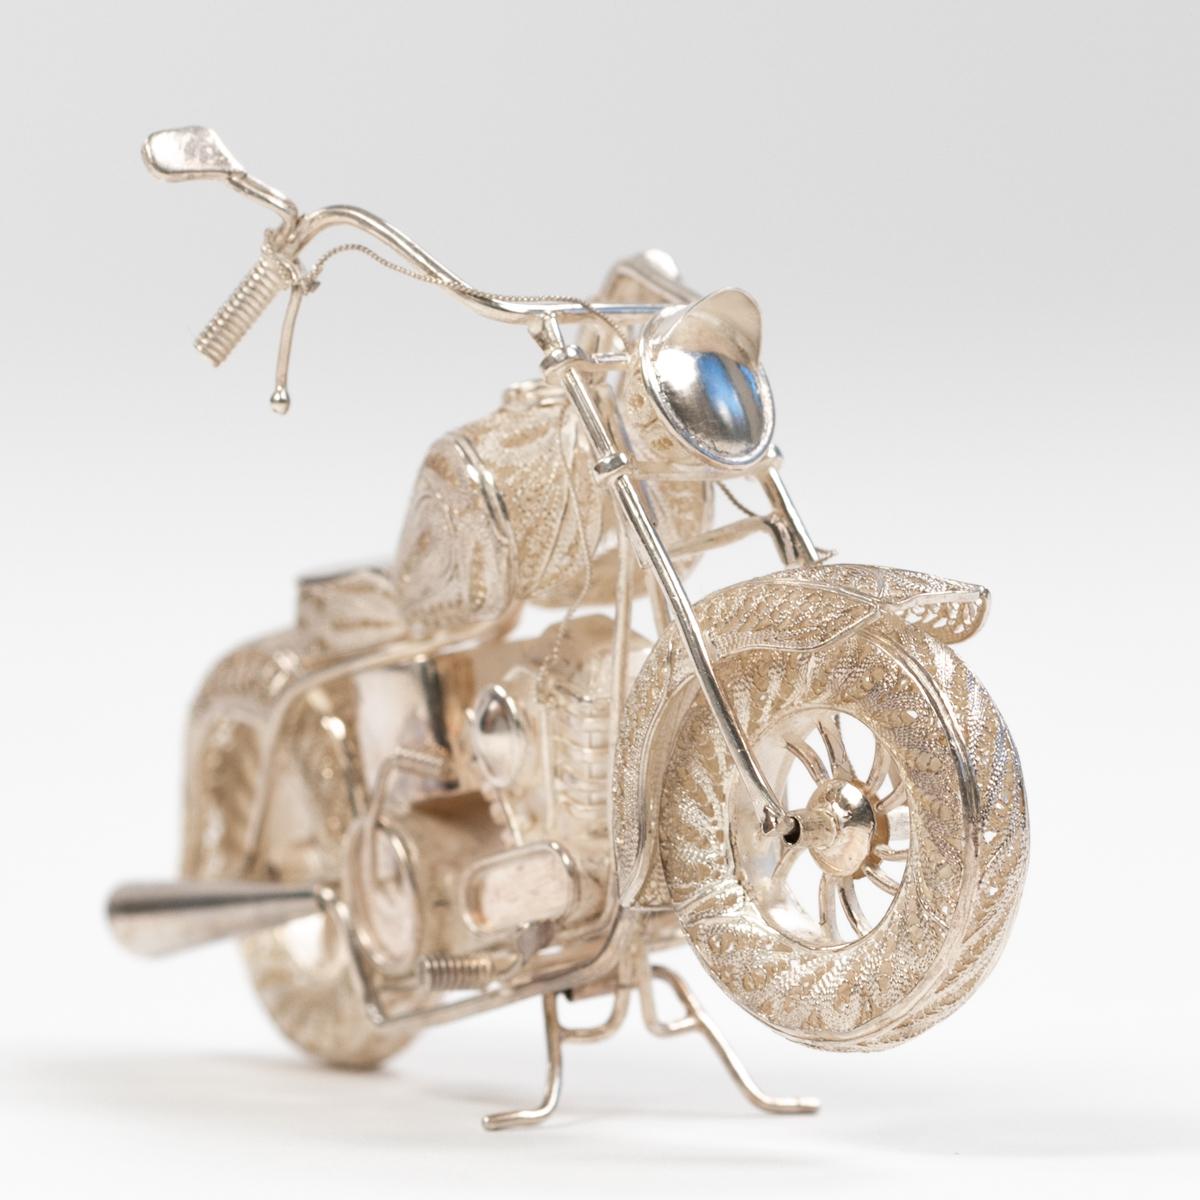 Contemporary Harley Davidson Sculpture 925 Silver Handcrafted Filigree Technique Germany 2005